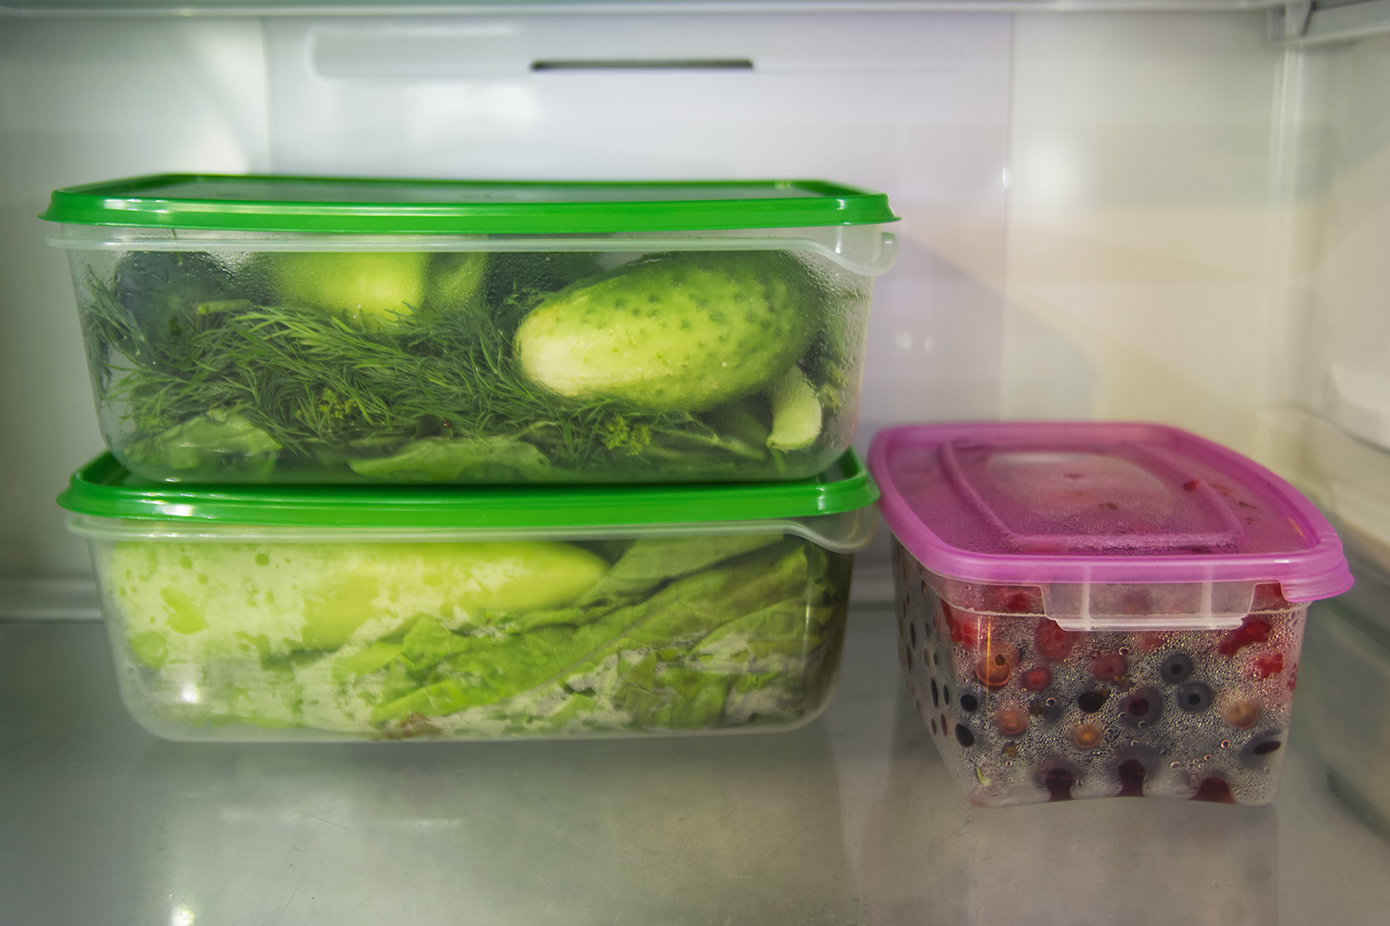 Stored food in the refrigerator